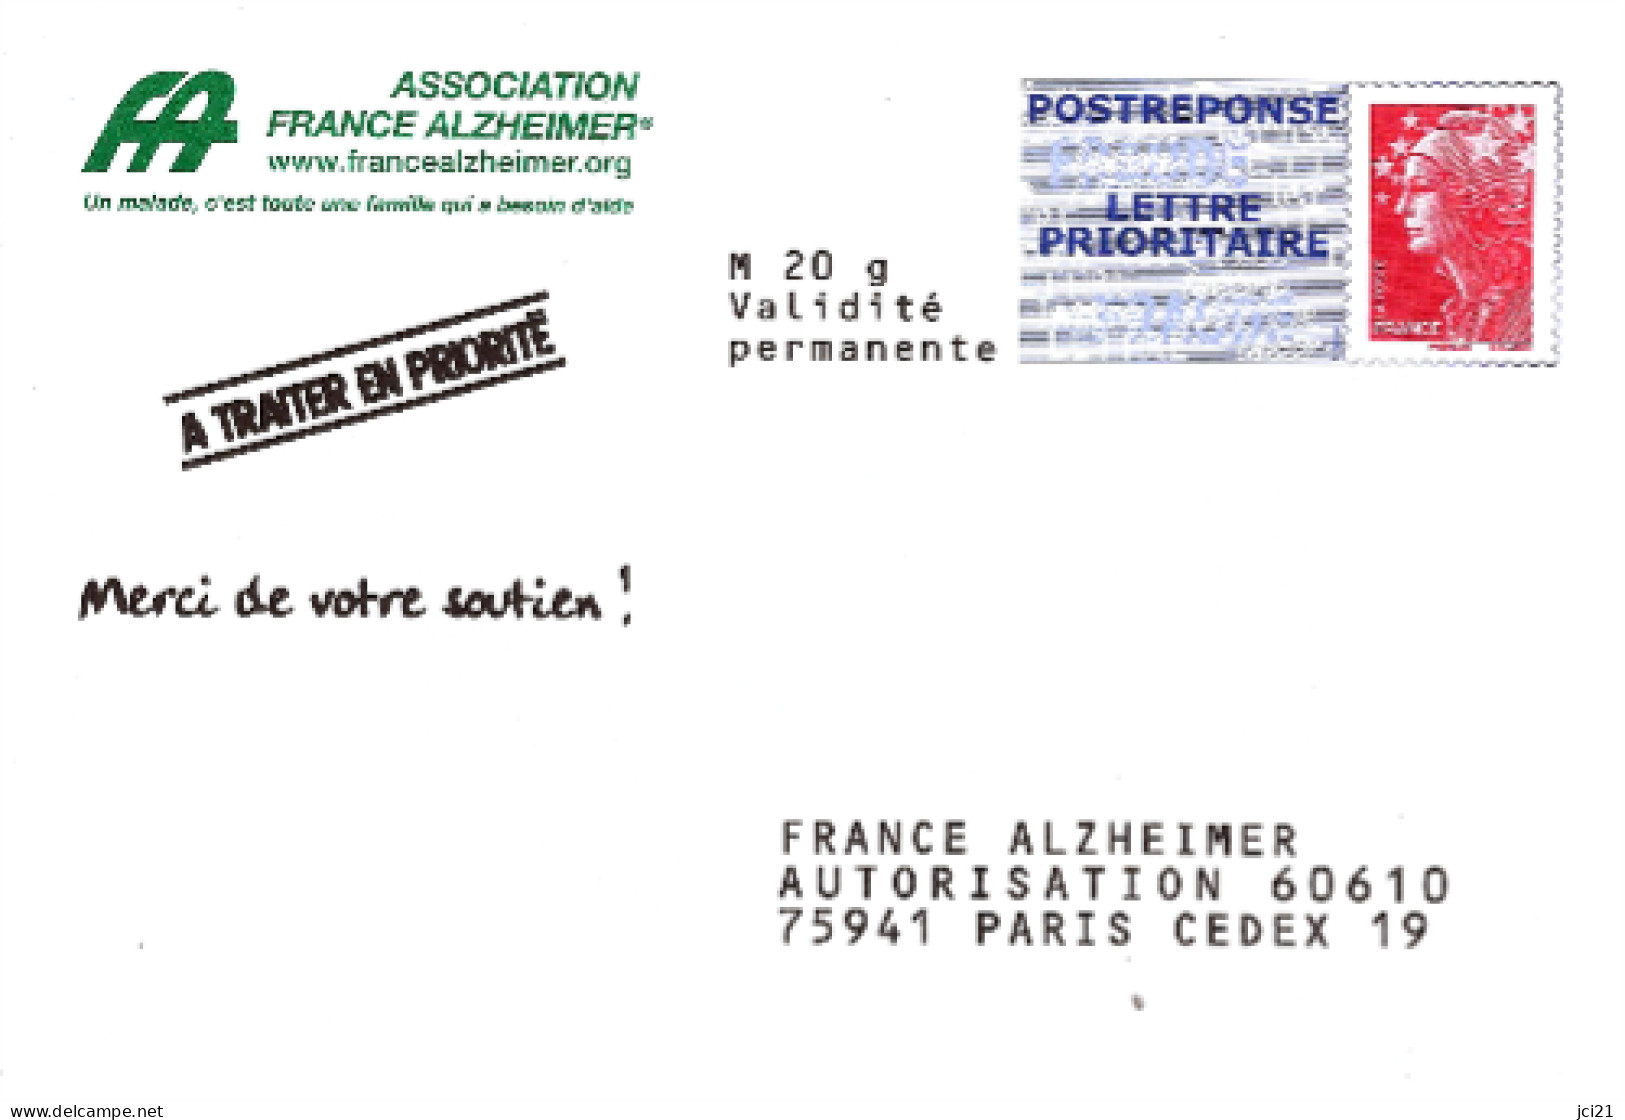 LOT DE 2 PAP BEAUJARD POSTREPONSE LETTRE PRIORITAIRE PHIL@POSTE-FRANCE ALZHEIMER- NEUVES (782)_P214 - PAP: Ristampa/Beaujard